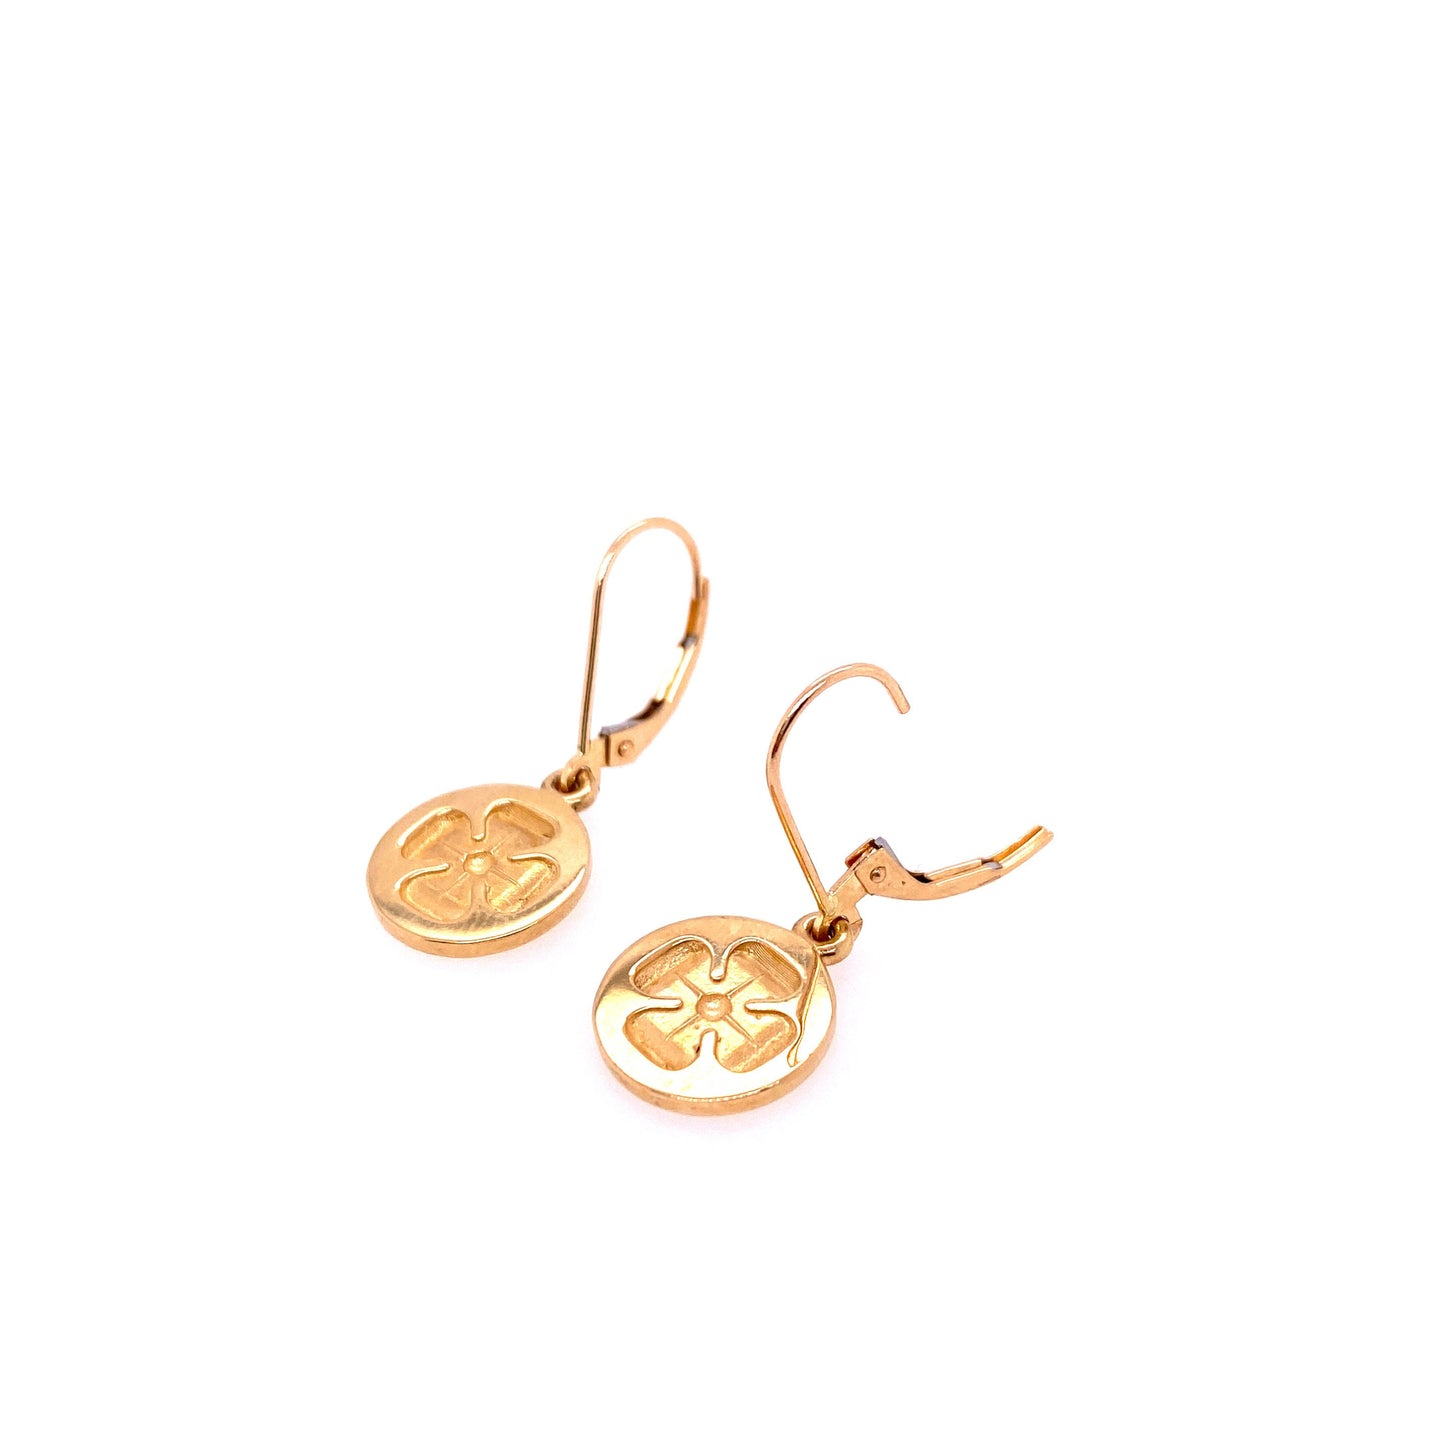 Exclusive 14kt Yellow Gold Ornate Clover Disc Earrings